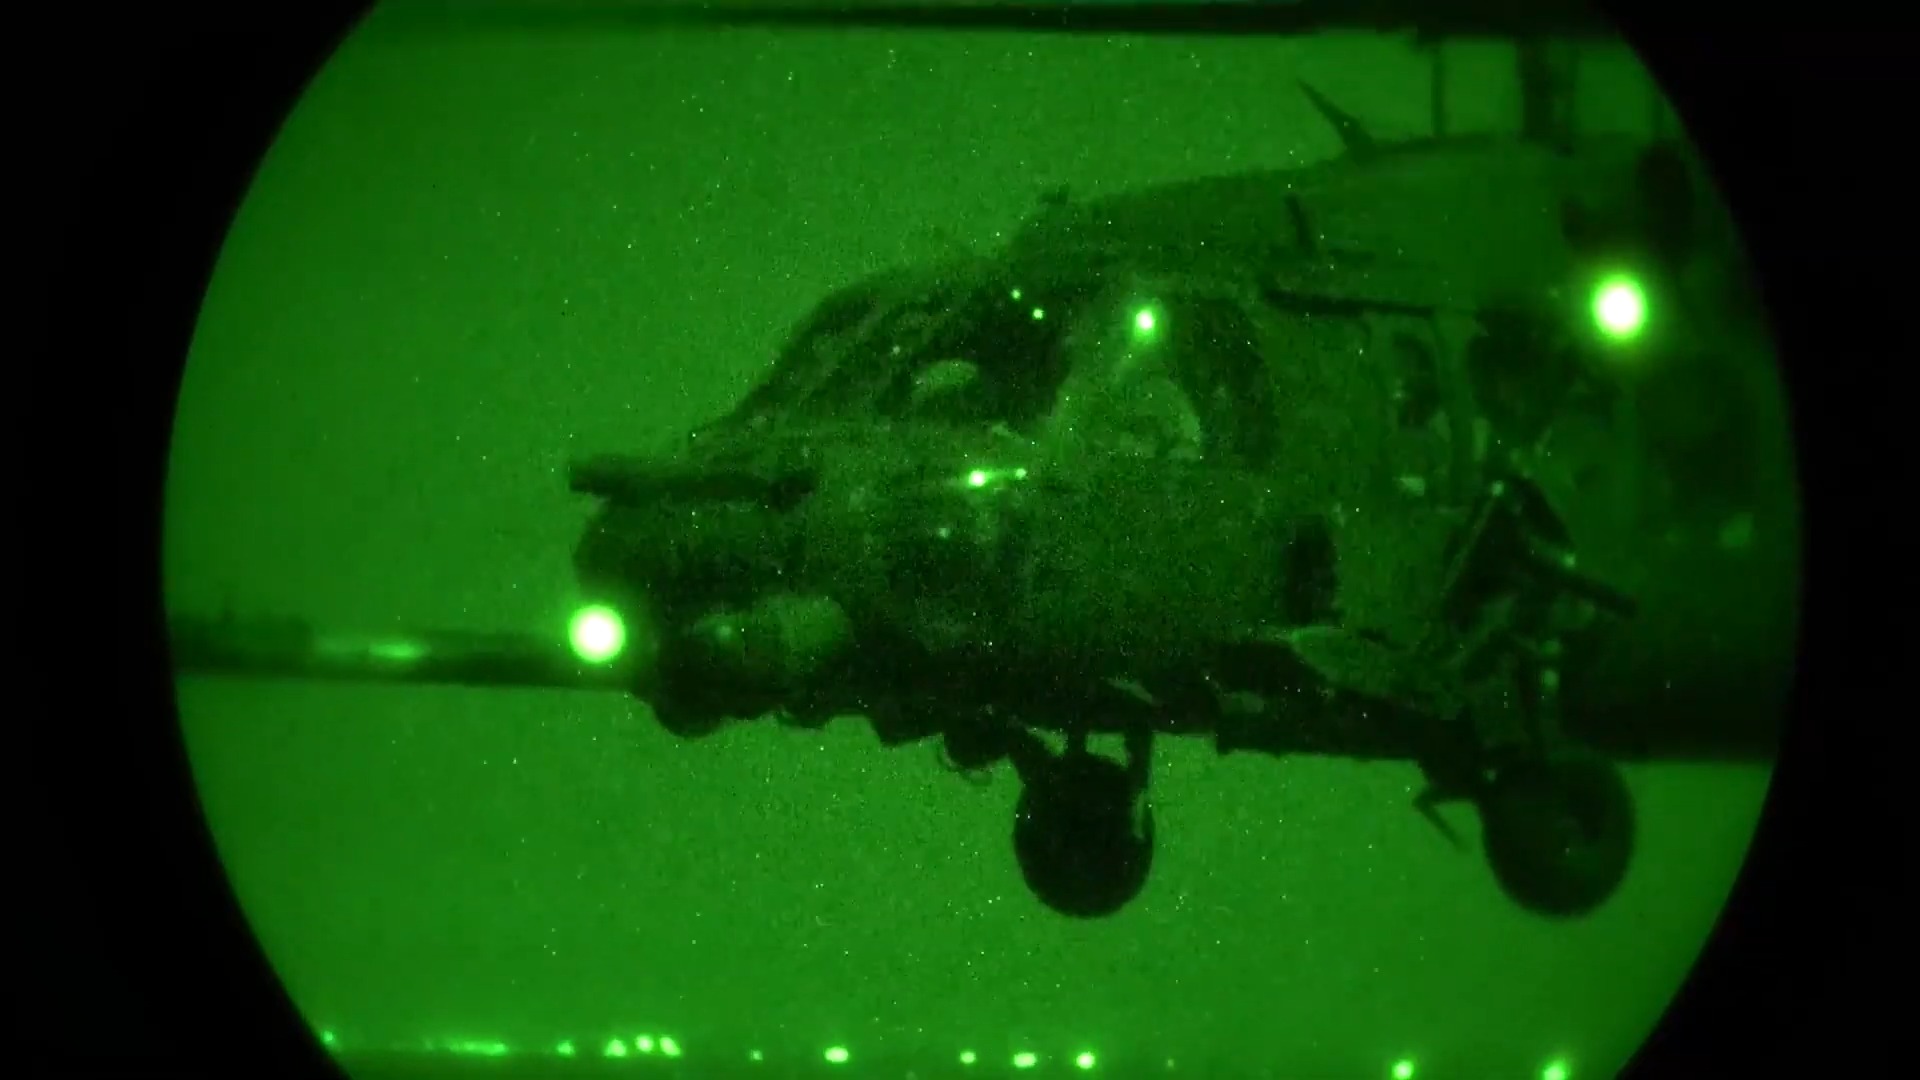 Sikorsky HH-60W 'Jolly Green II' Combat Rescue Helicopter